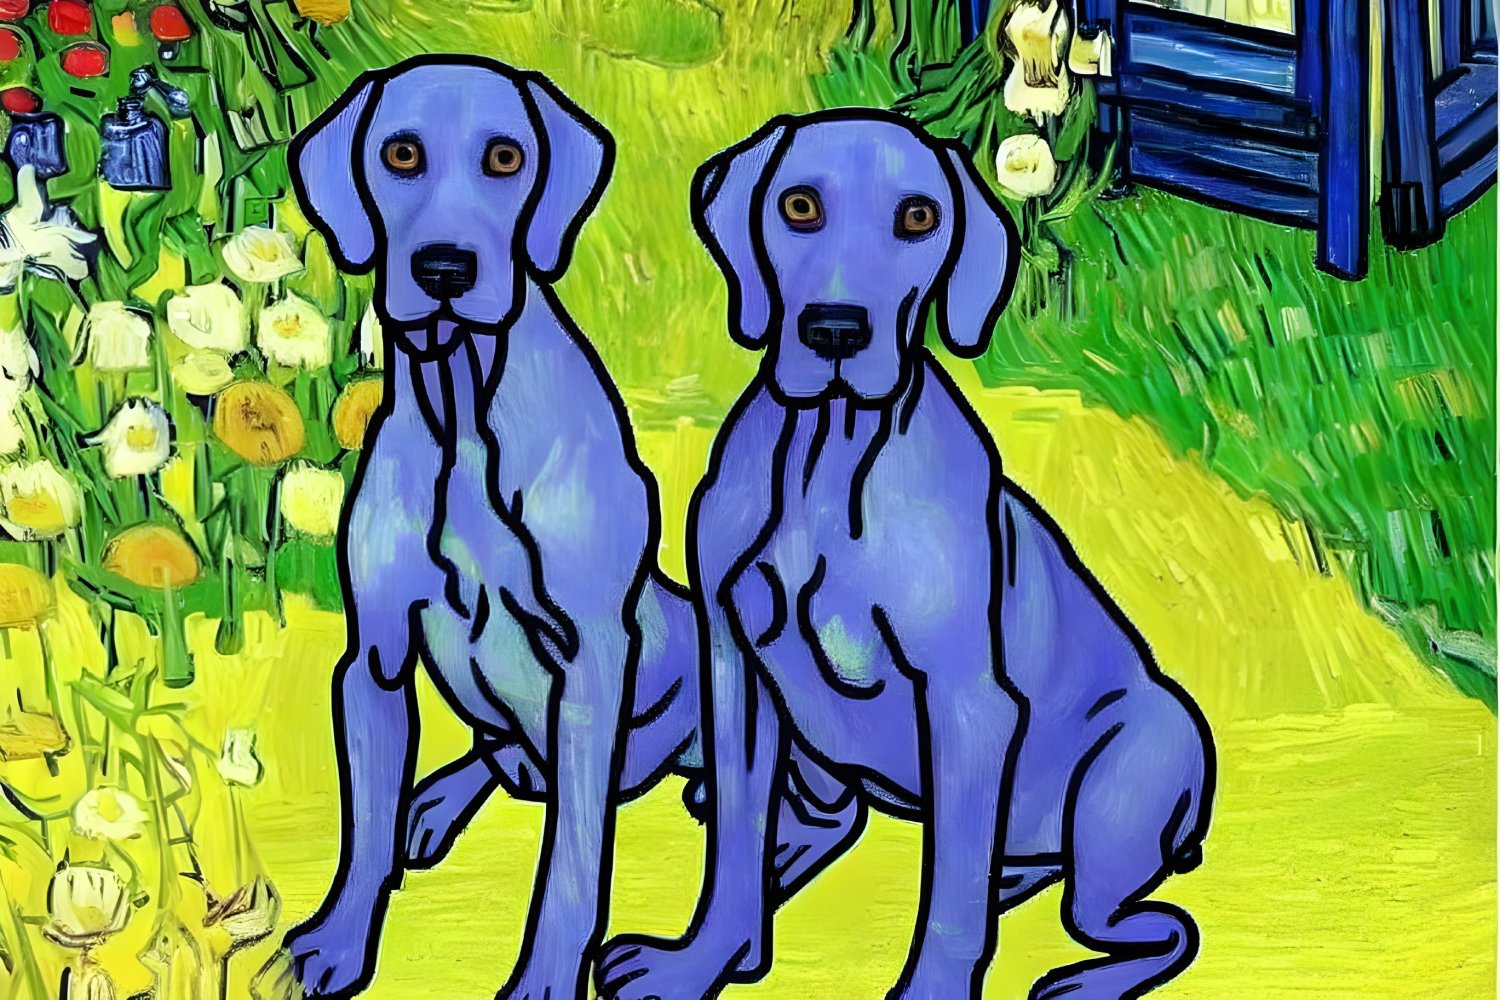 Stylized blue dogs in front of colorful background with floral and window elements